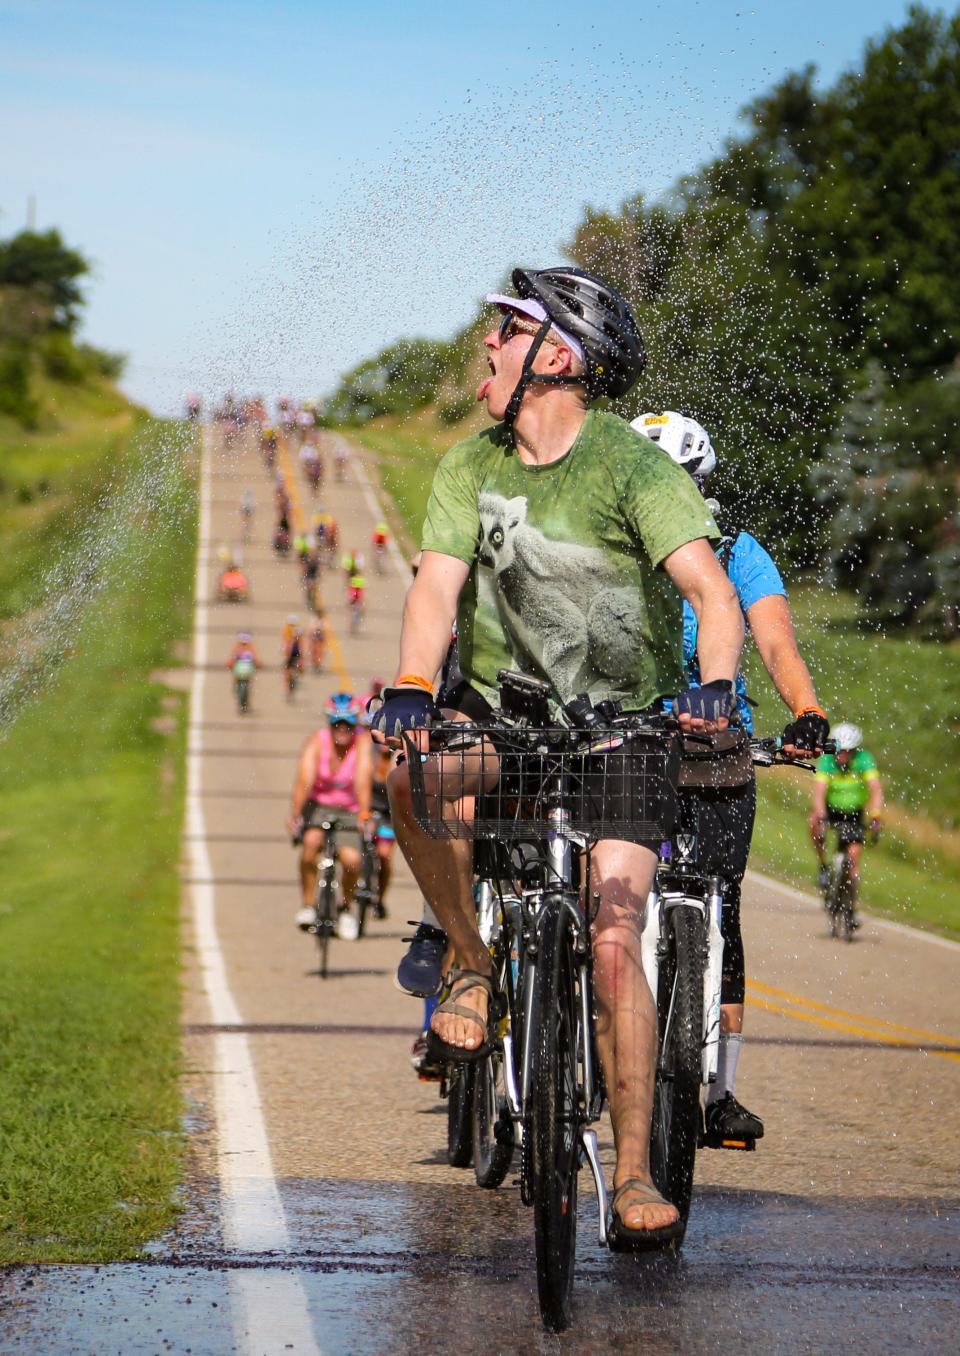 Riders roll though a sprinkler on the way to meeting town Anthon on Sunday, the first day of RAGBRAI 2022.